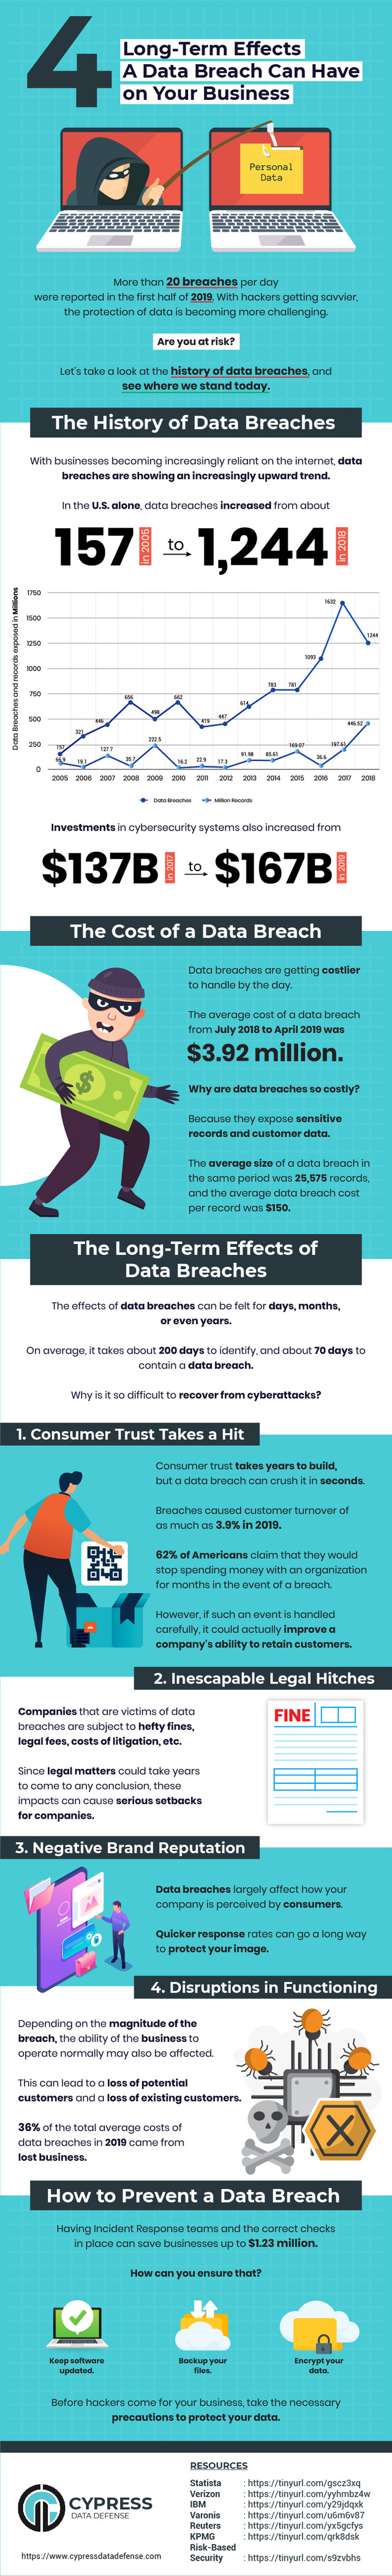 Cypress data defense outlines the long-term effects of data breaches